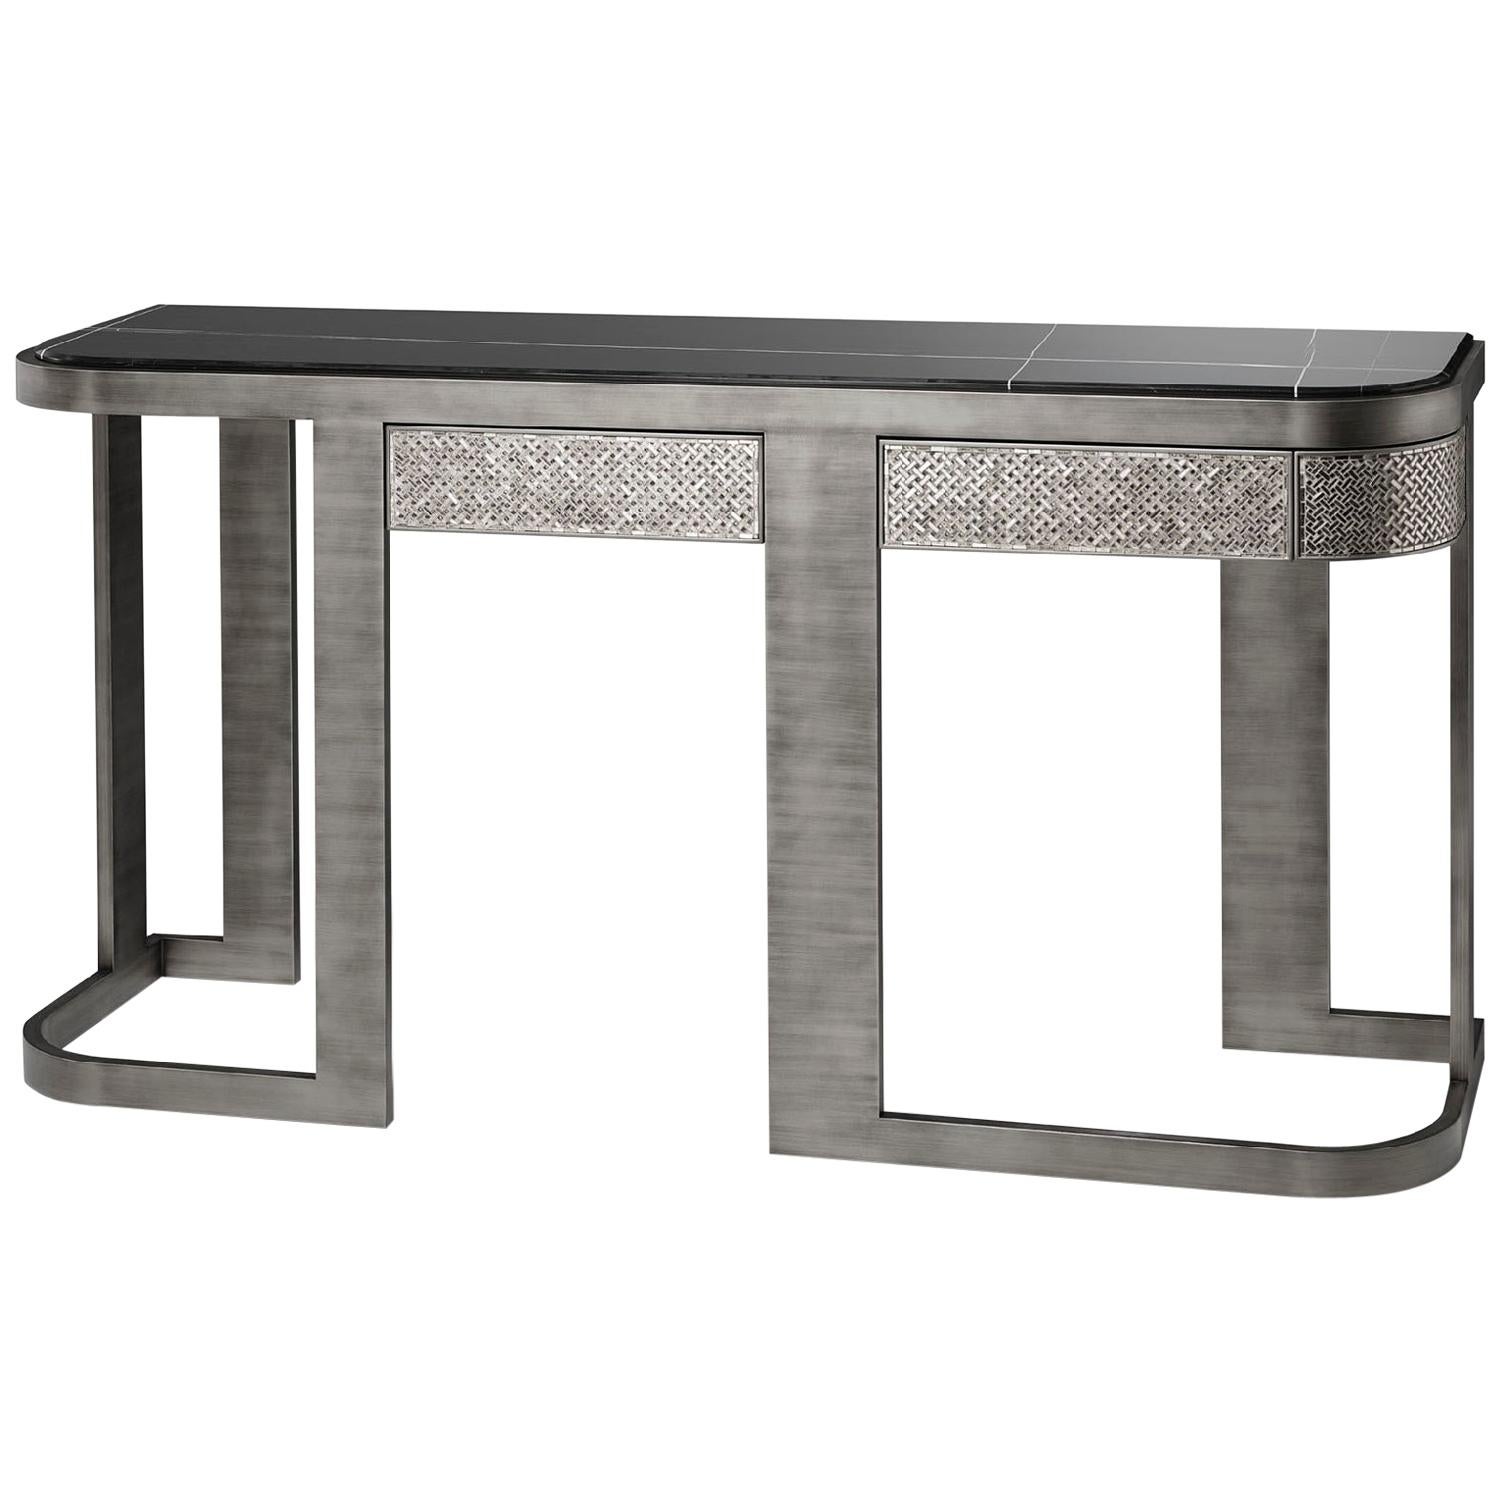 Console Metal Frame Distressed Paint Finish Top Calacatta Gold or Black Aziz